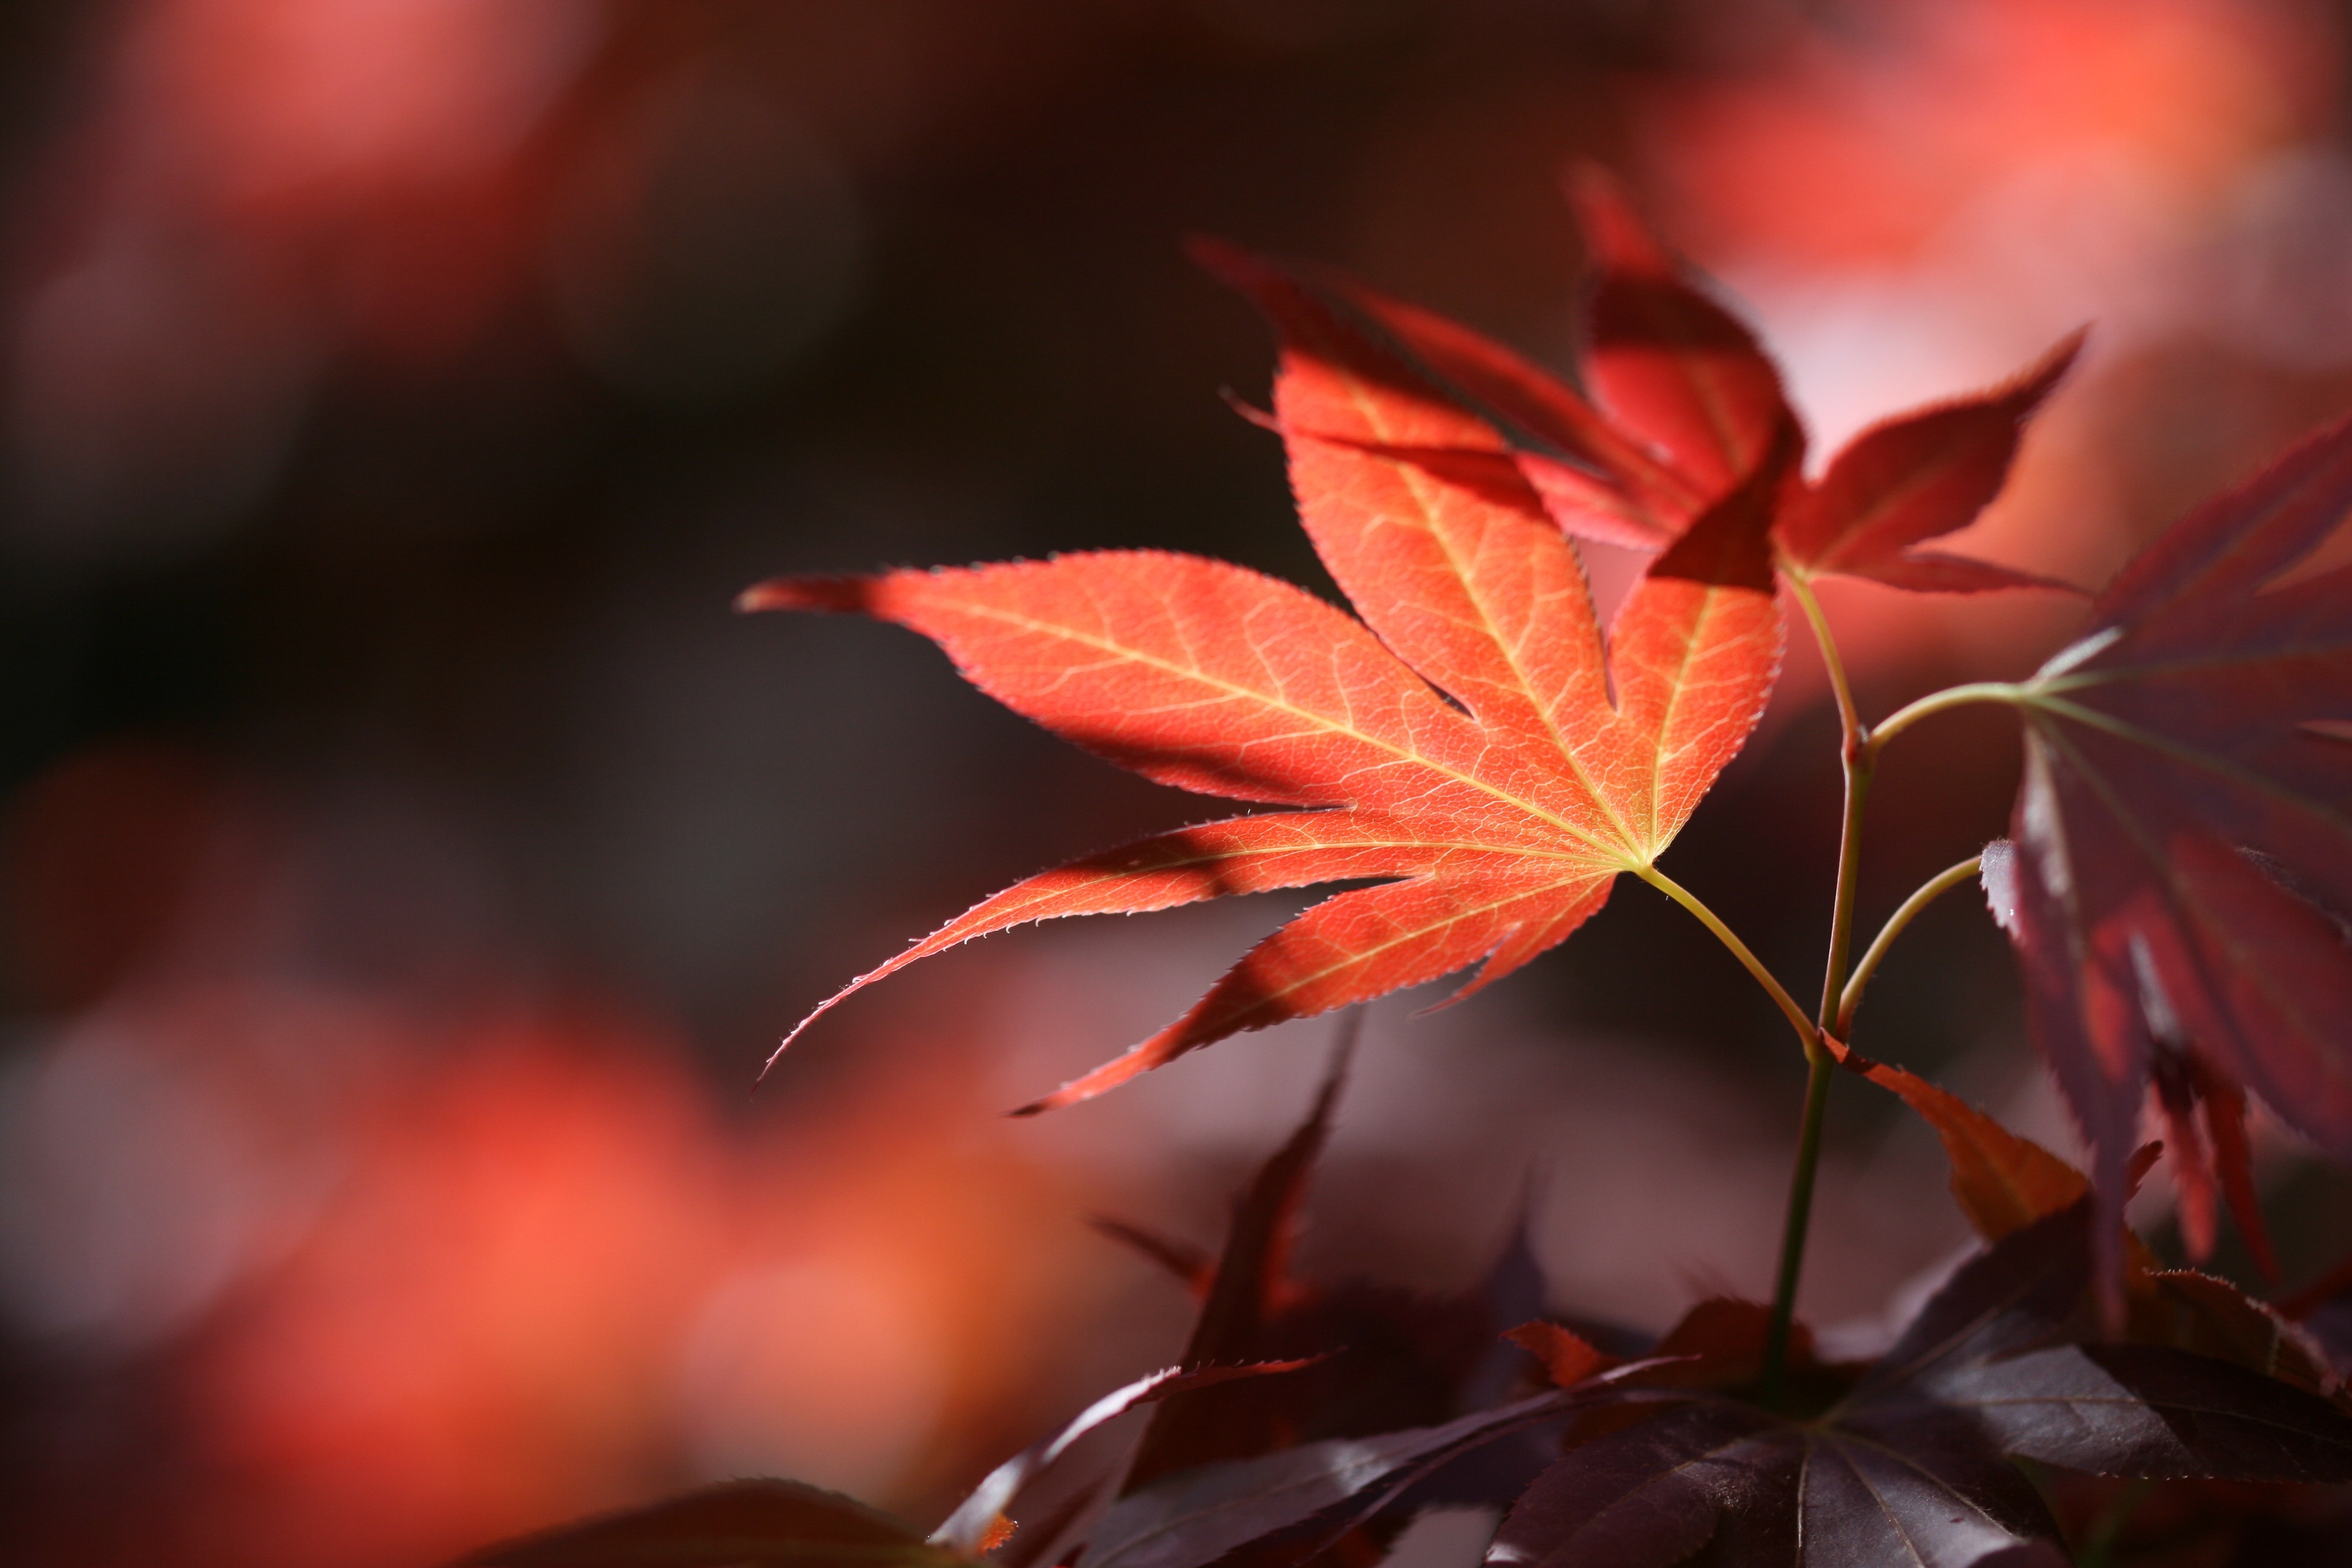 Forest, Nature, Leaves, Autumn, close-up, leaf